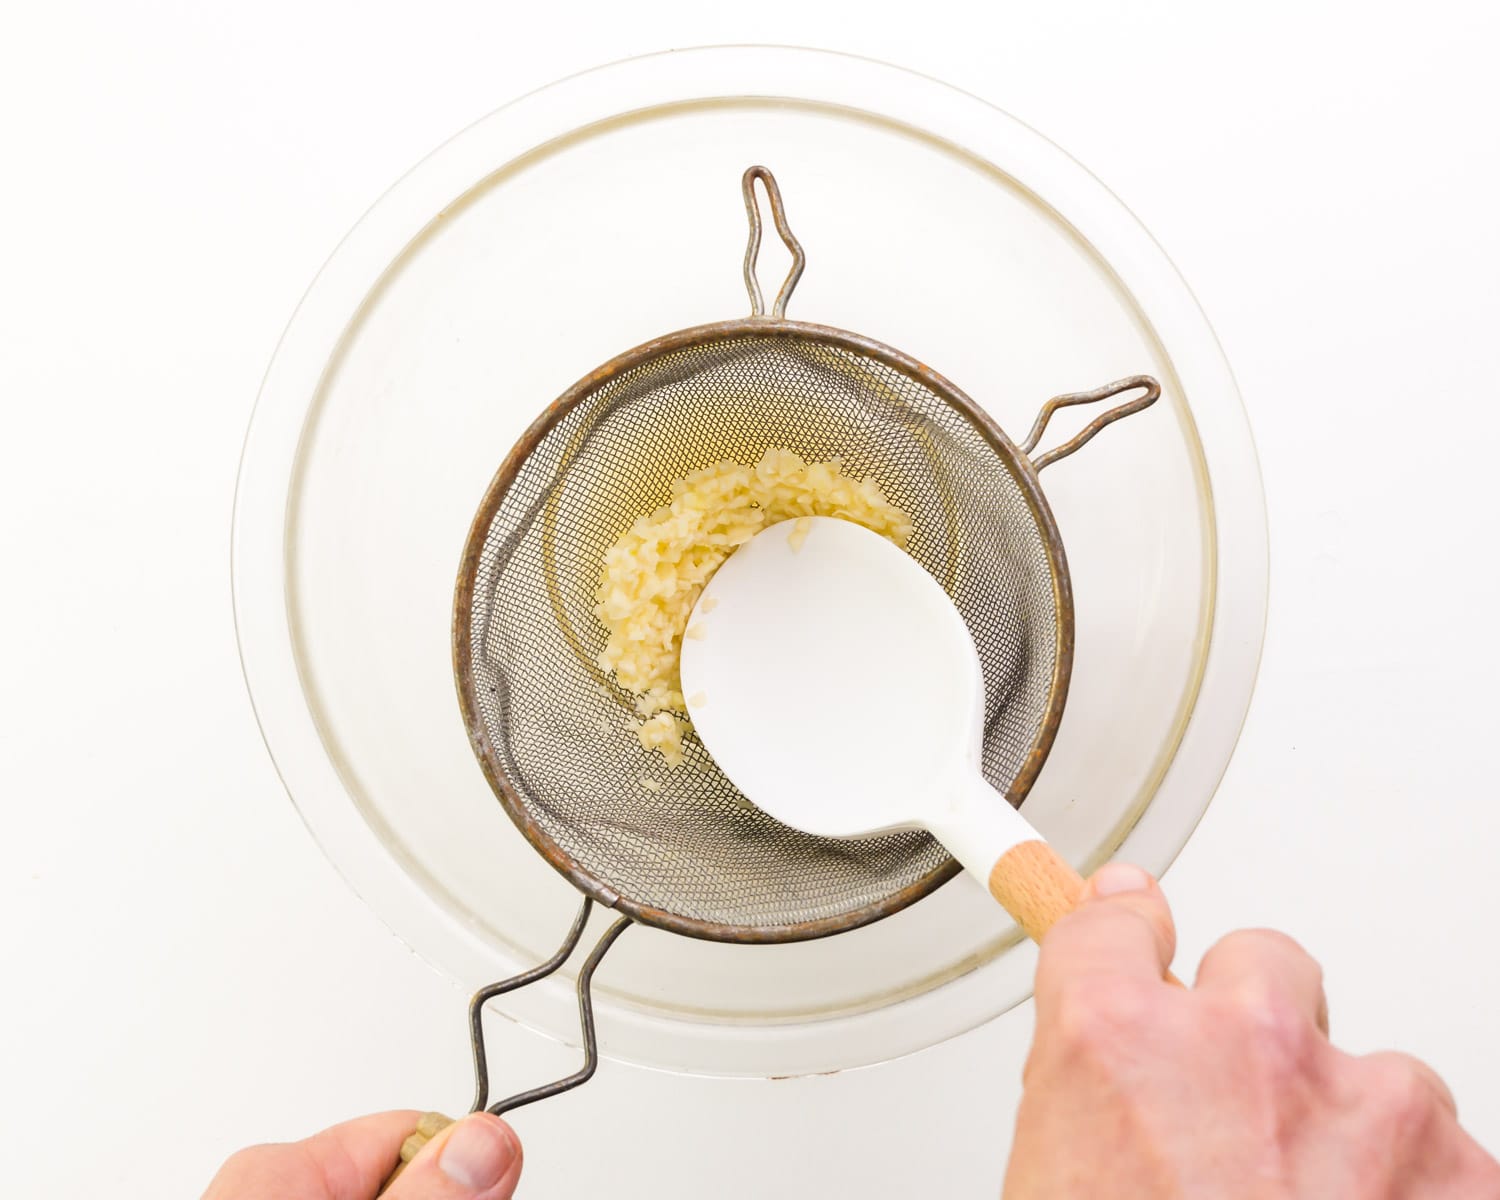 Pressing garlic with a spatula into a fine mesh strainer placed over a glass bowl.